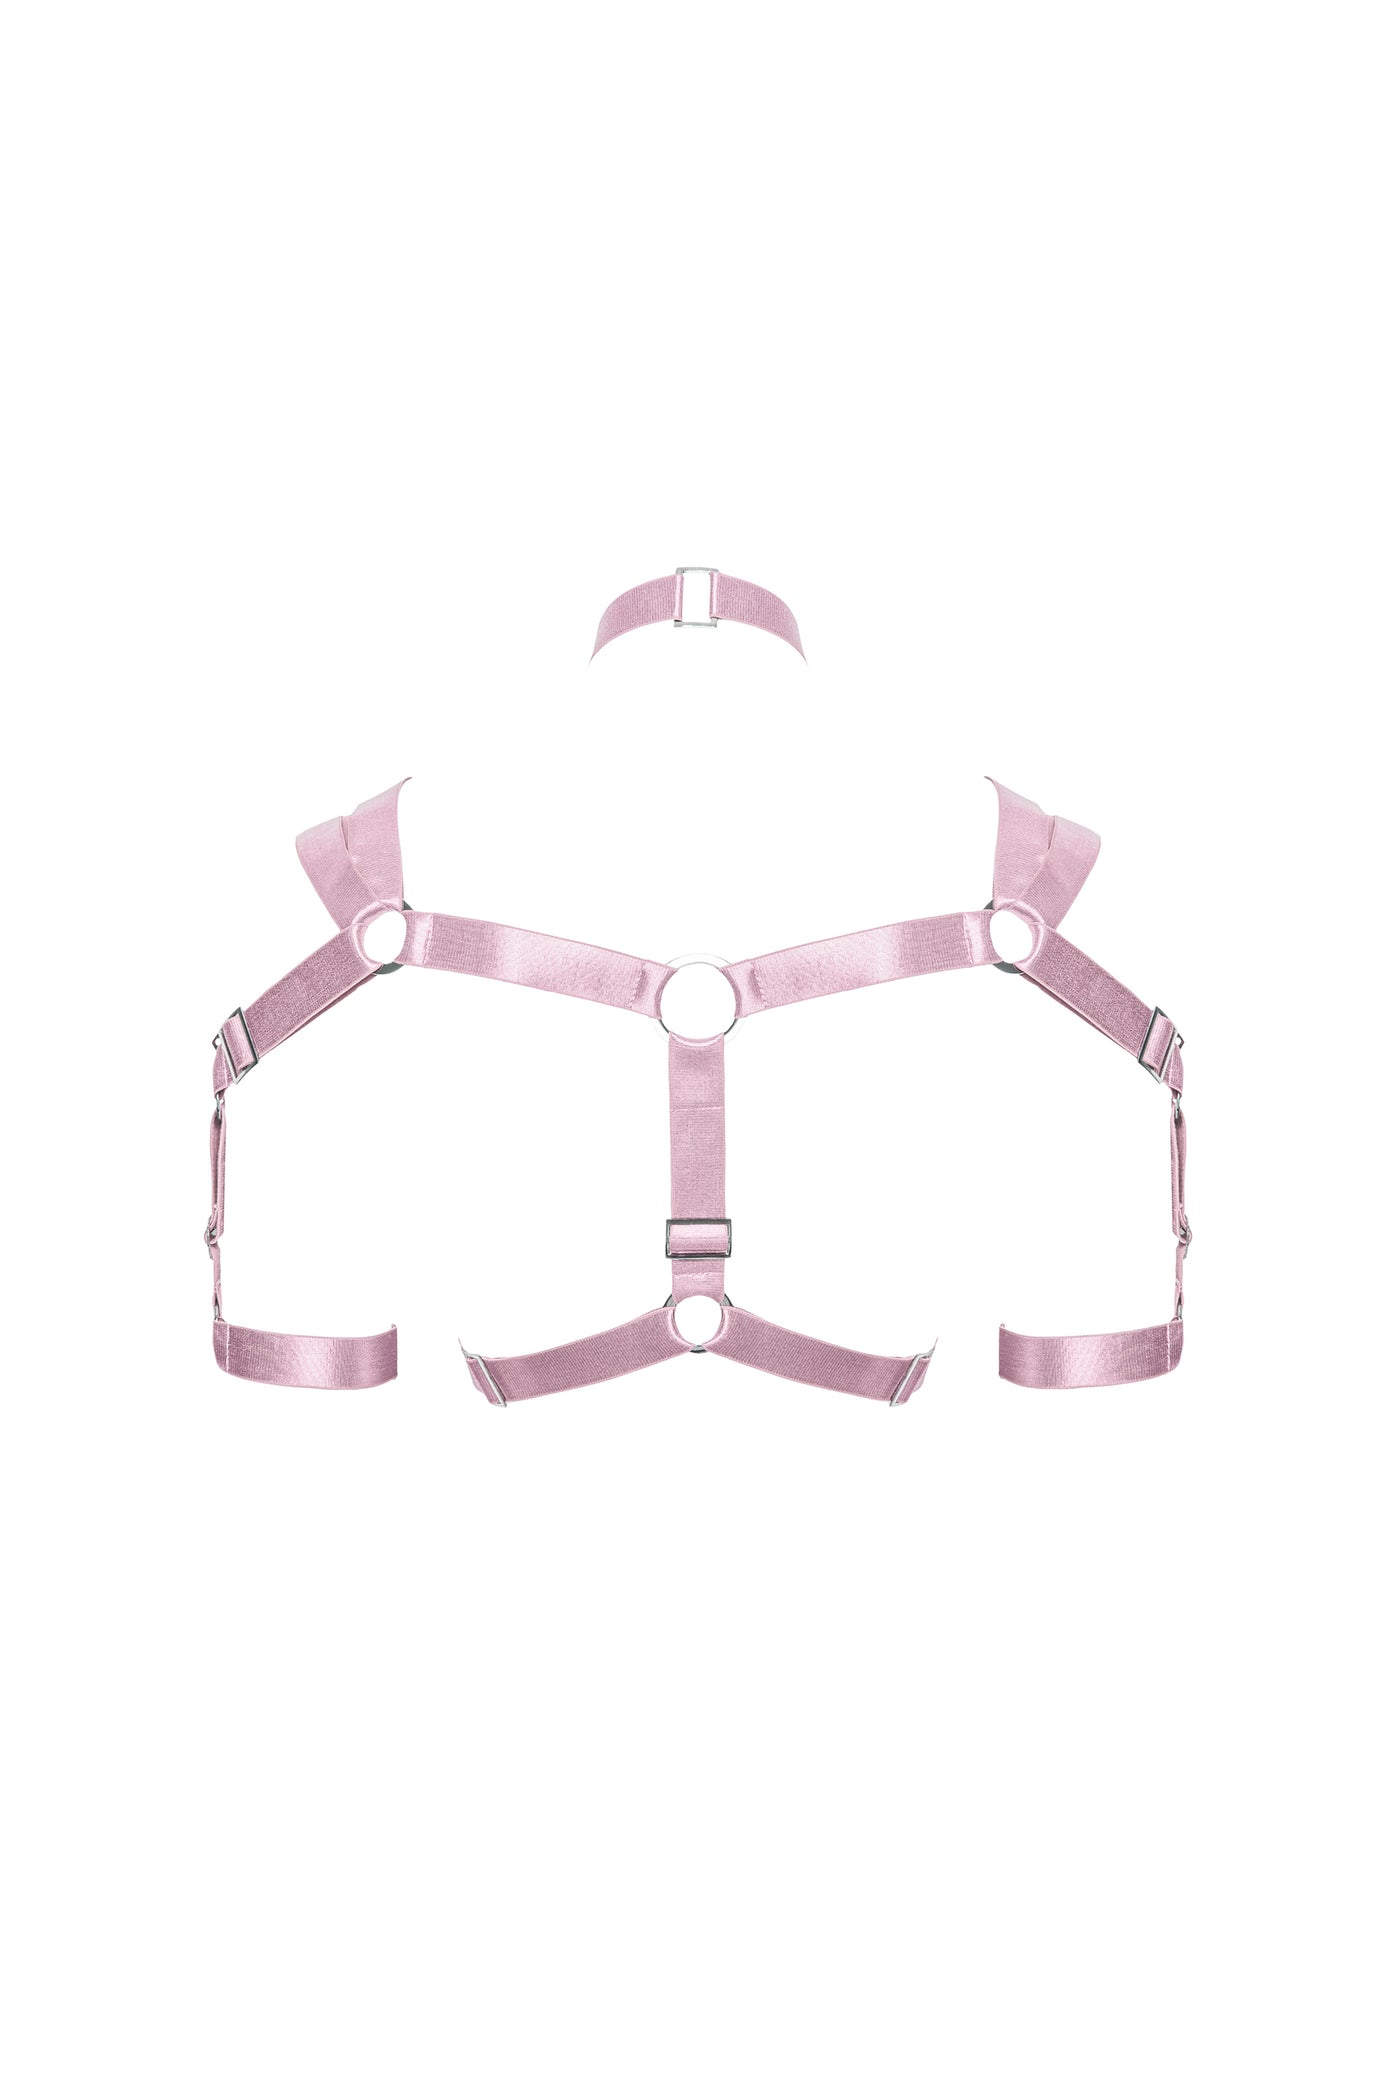 High Priestess Crop Harness - Dusted Pink